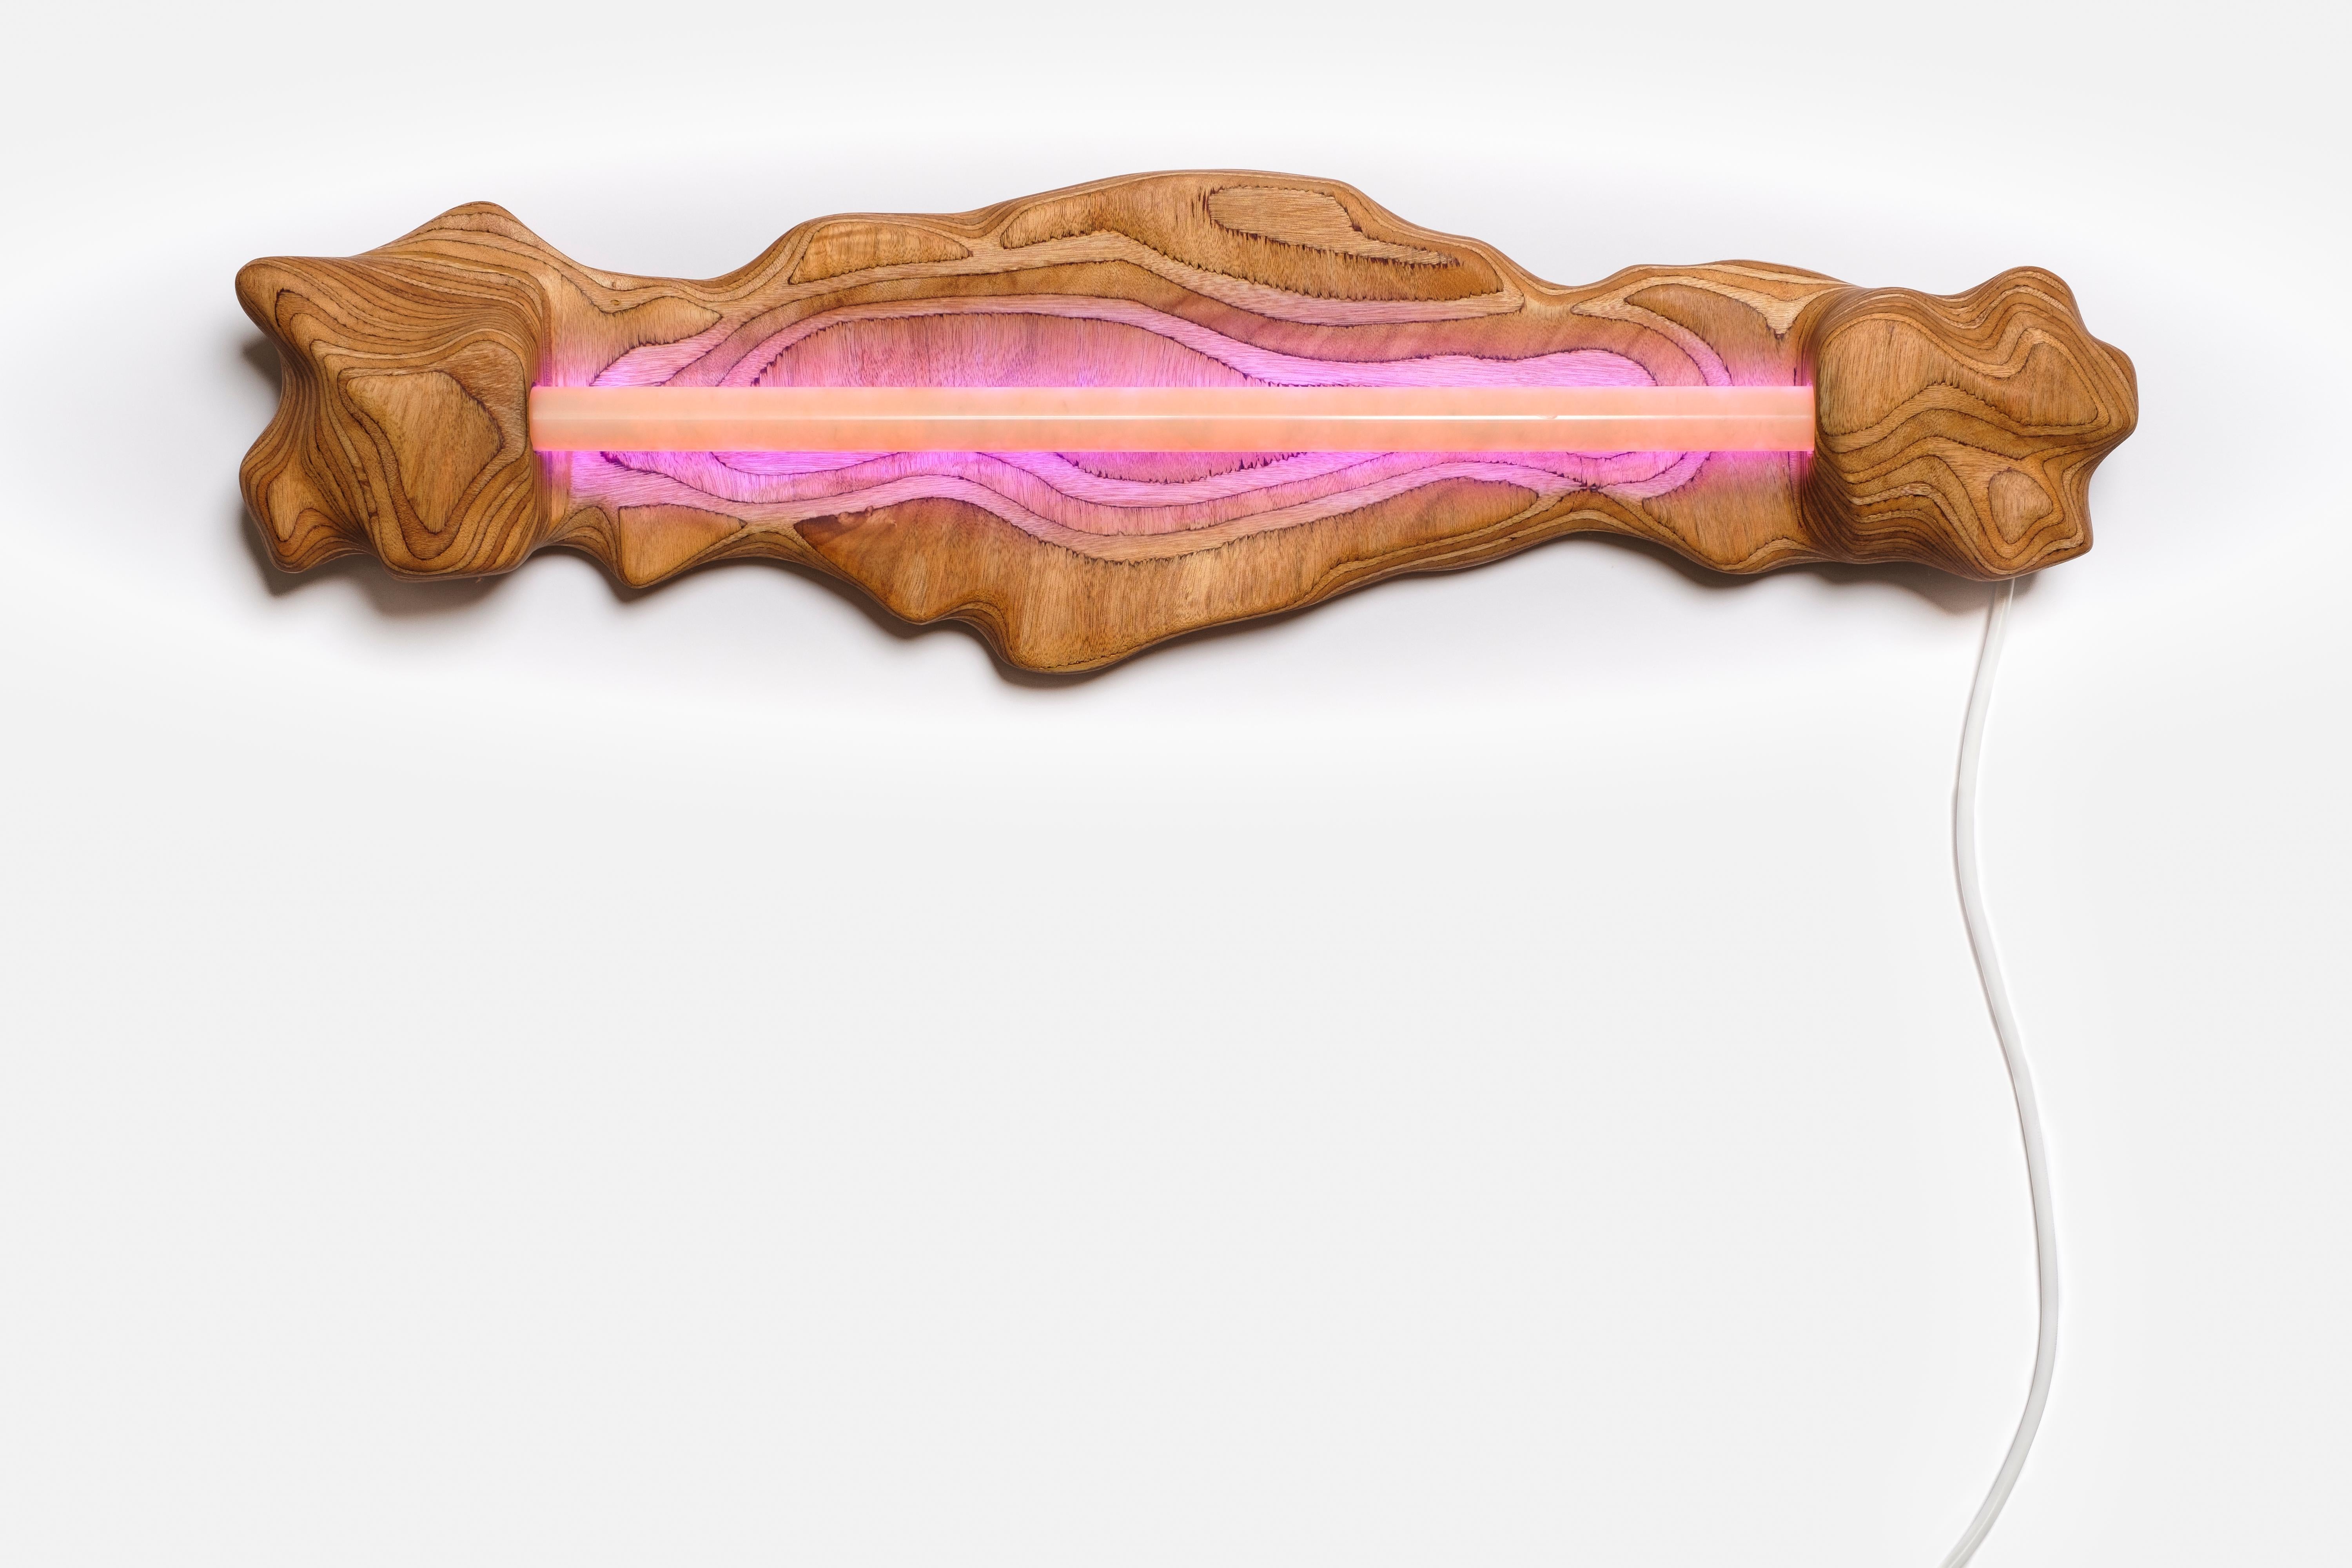 Dutch Wall Light with Okoume Wood and Pink Neon, by Studio Gert Wessels For Sale